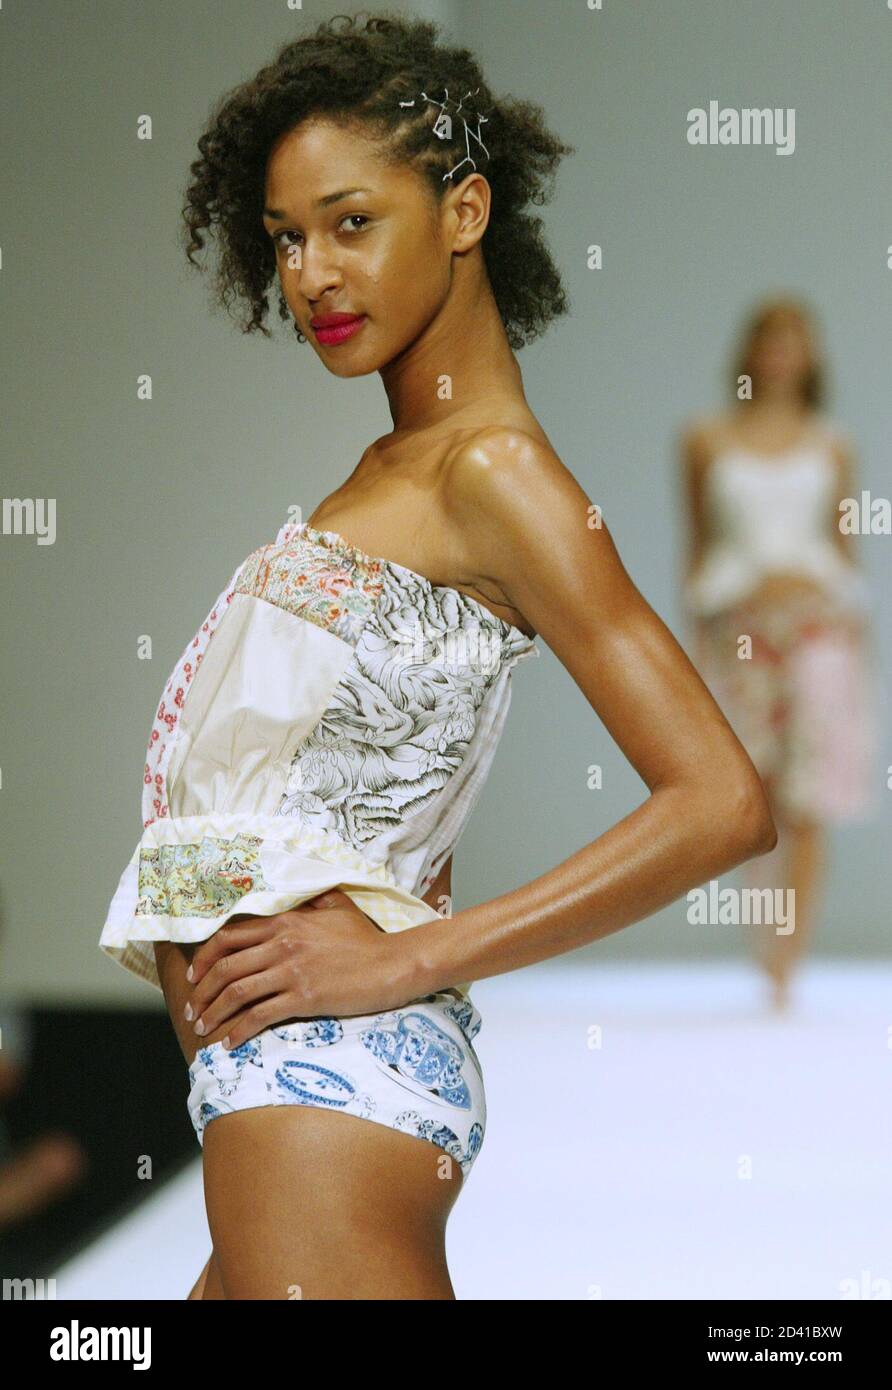 A model wears a garment by Canberra designer label Sandra Thom during Australian Fashion Week in Sydney May 9, 2002. Fashion week, which runs from May 6-10, showcases over 70 Australian and international designers. REUTERS/Mark Baker  DG/DL Stock Photo